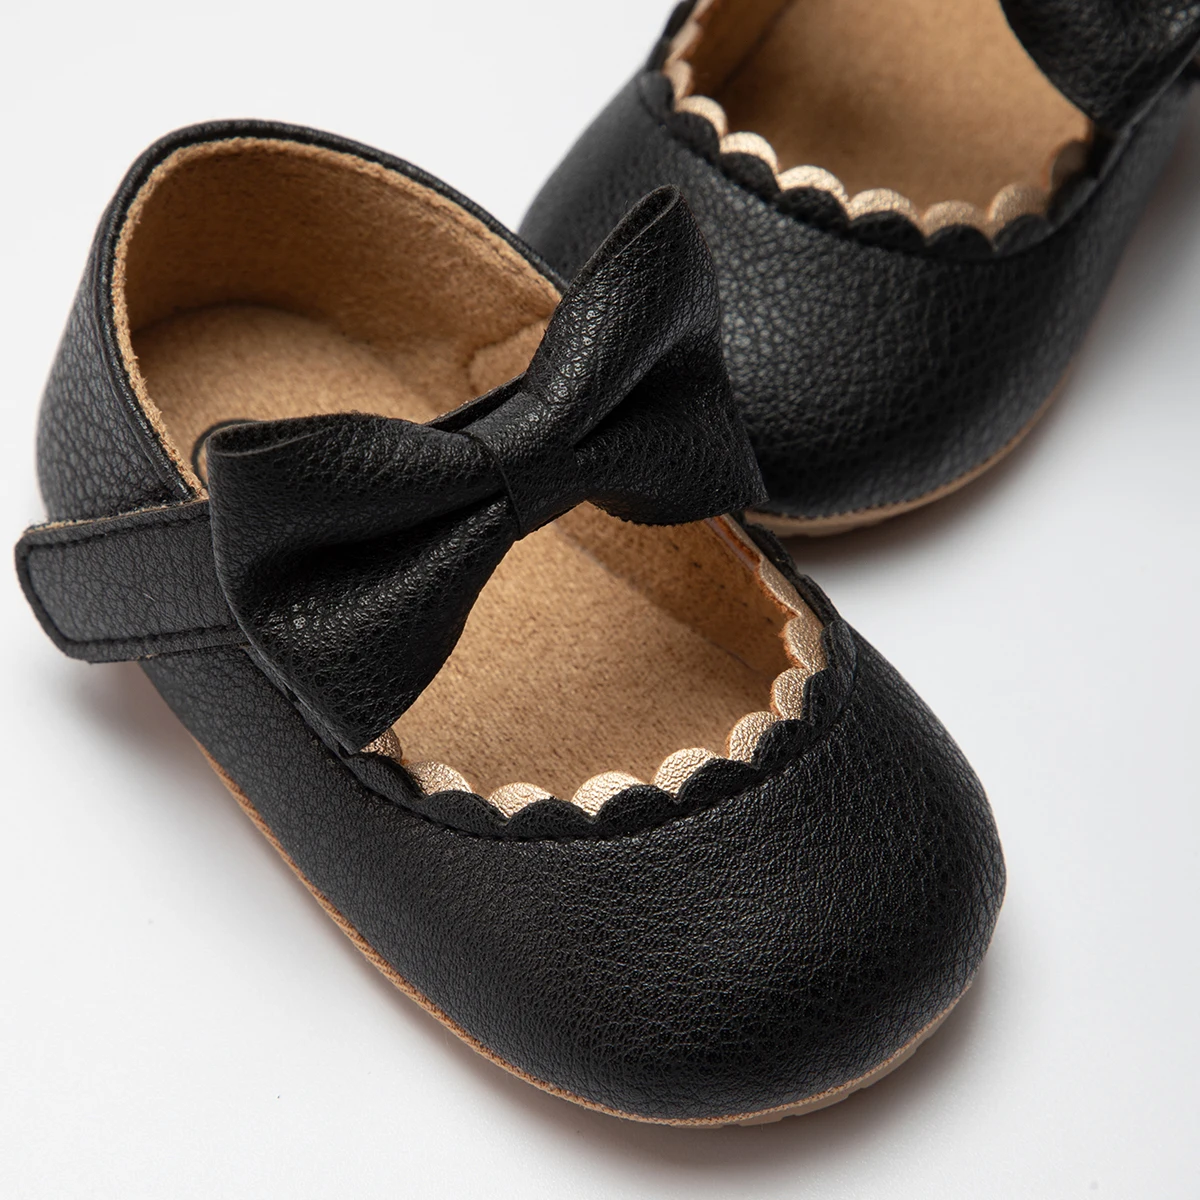 KIDSUN Baby Casual Shoes Infant Toddler Bowknot Non-slip Rubber Soft-Sole Flat PU First Walker Newborn Bow Decor Mary Janes images - 6